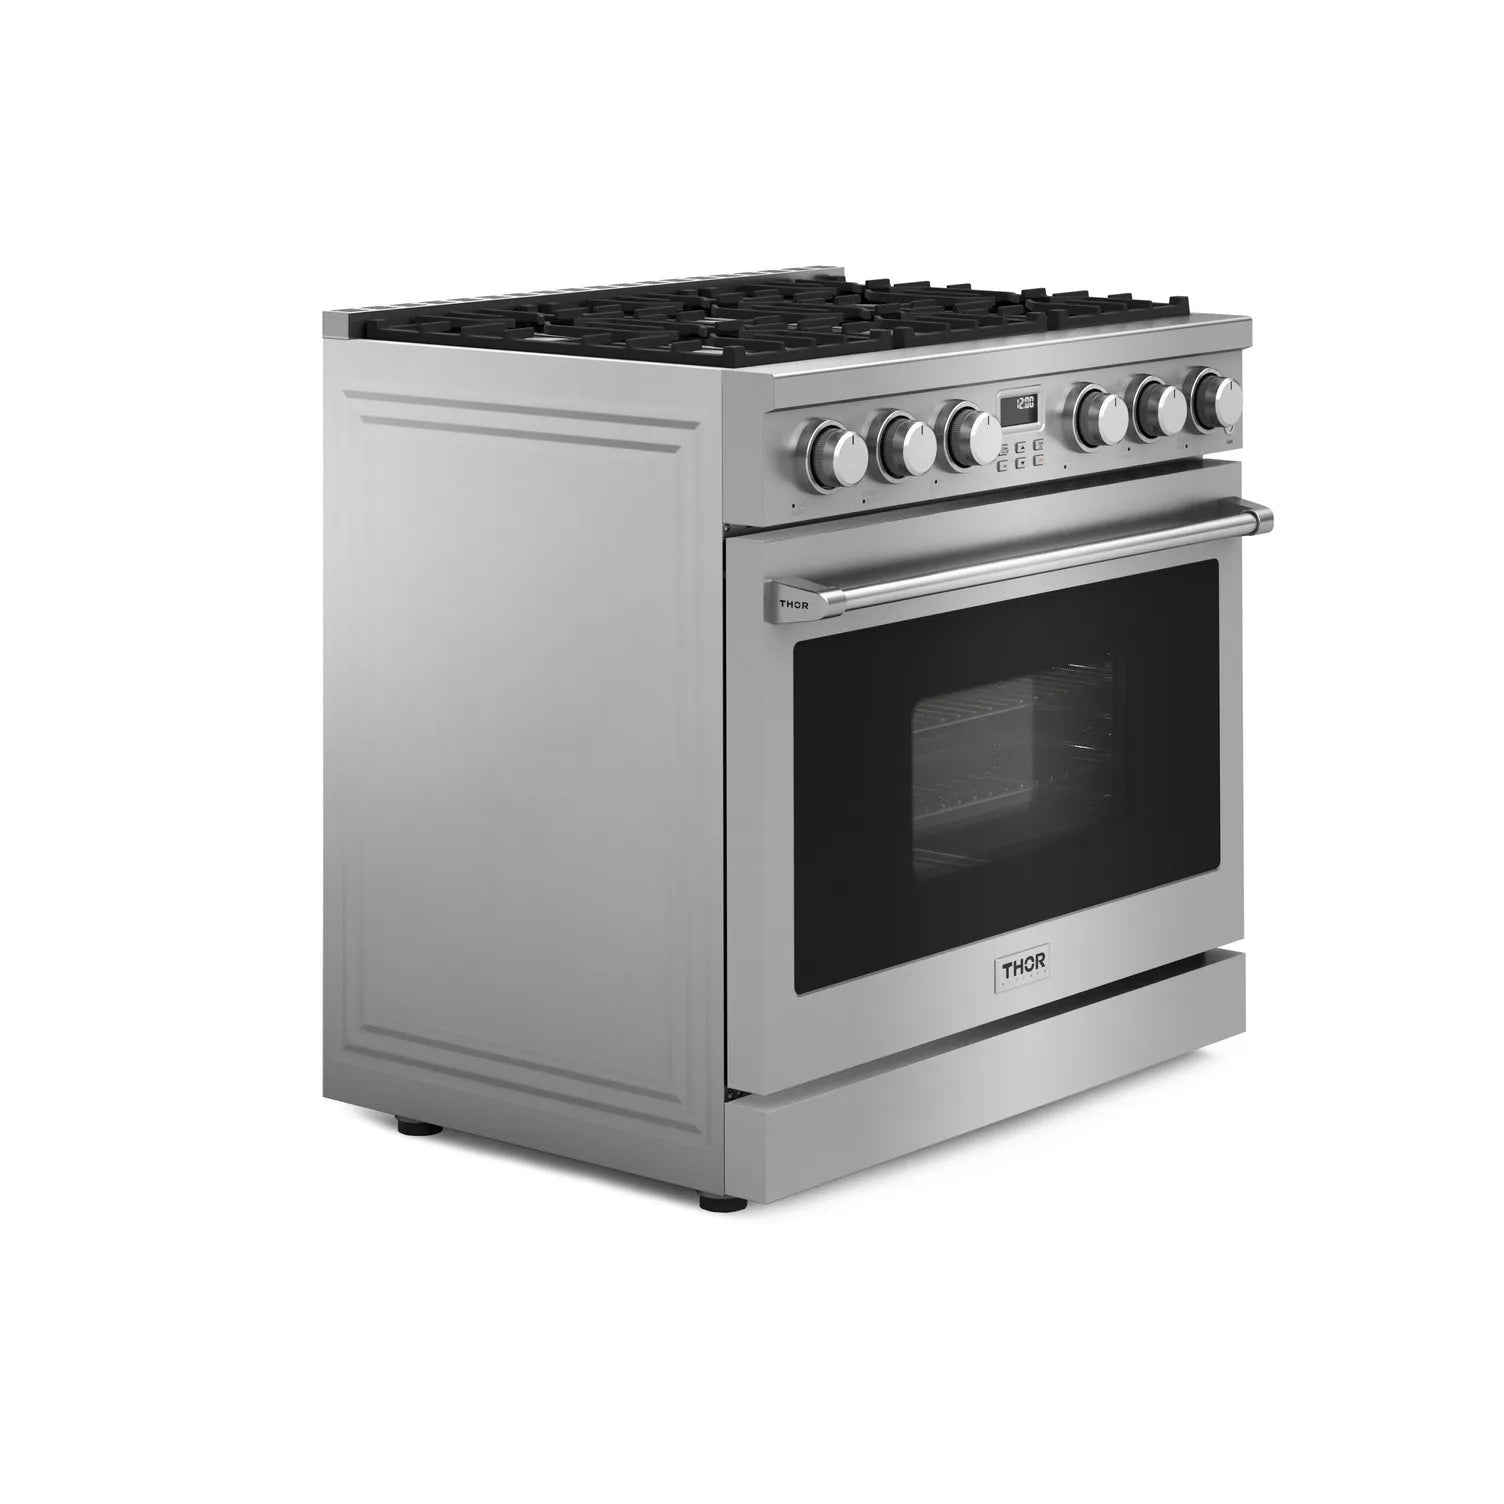 36" Contemporary Professional Gas Range in Stainless Steel ARG36 - RenoShop